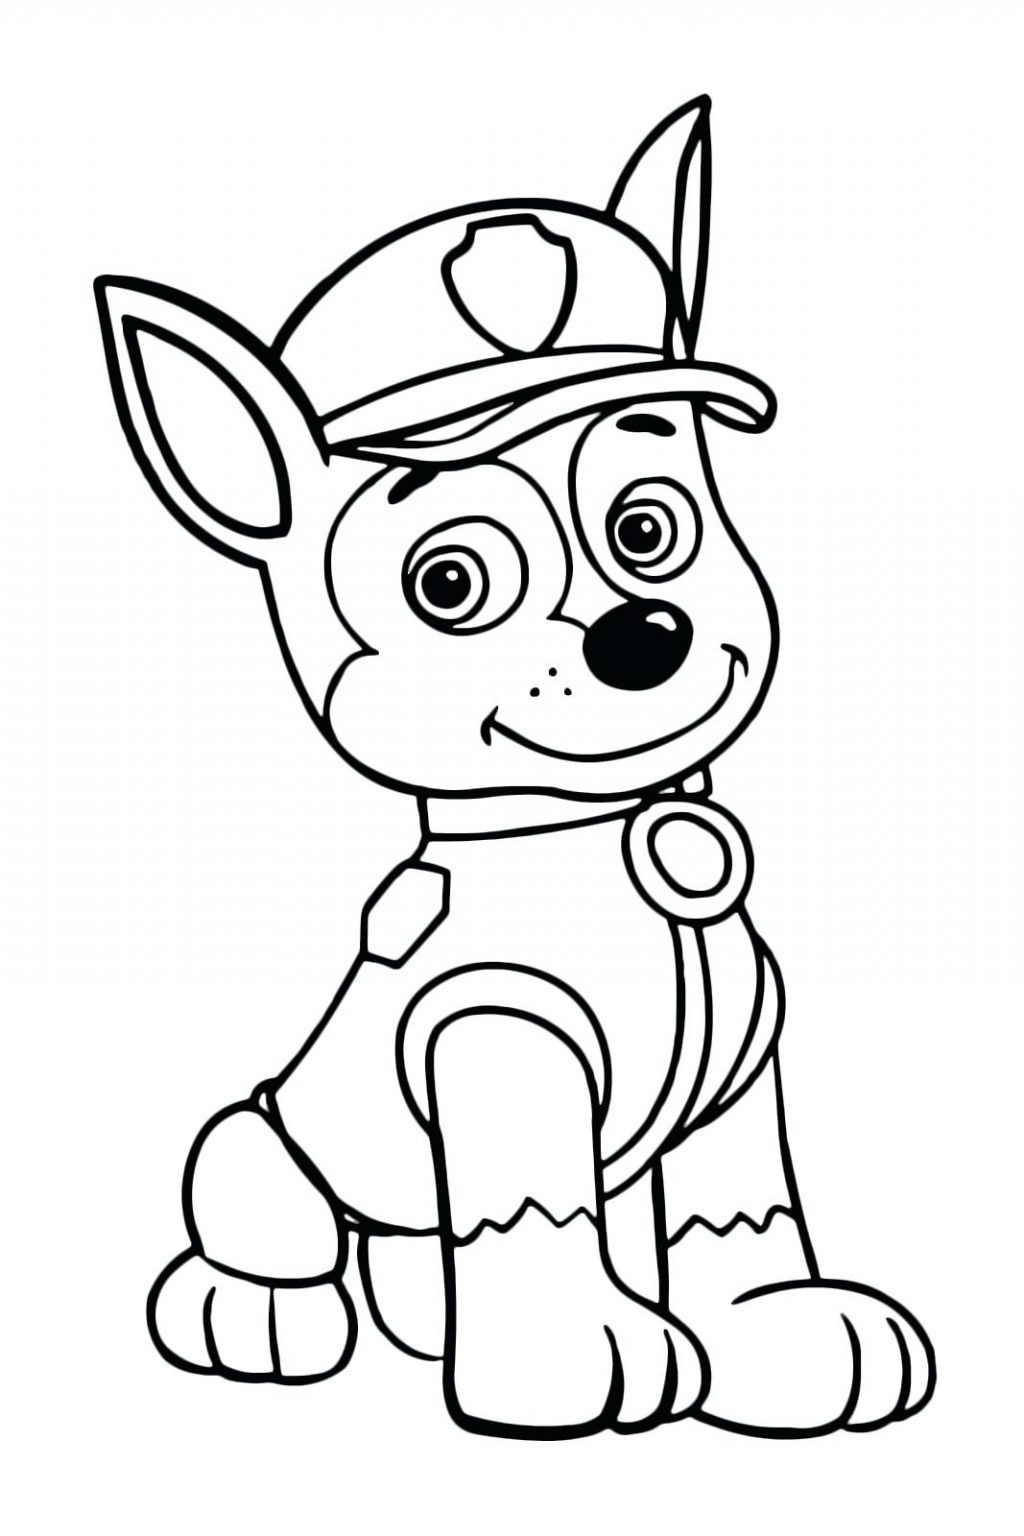 Printable Chase Paw Patrol Coloring Pages - coloring pages Chase Paw Patrol